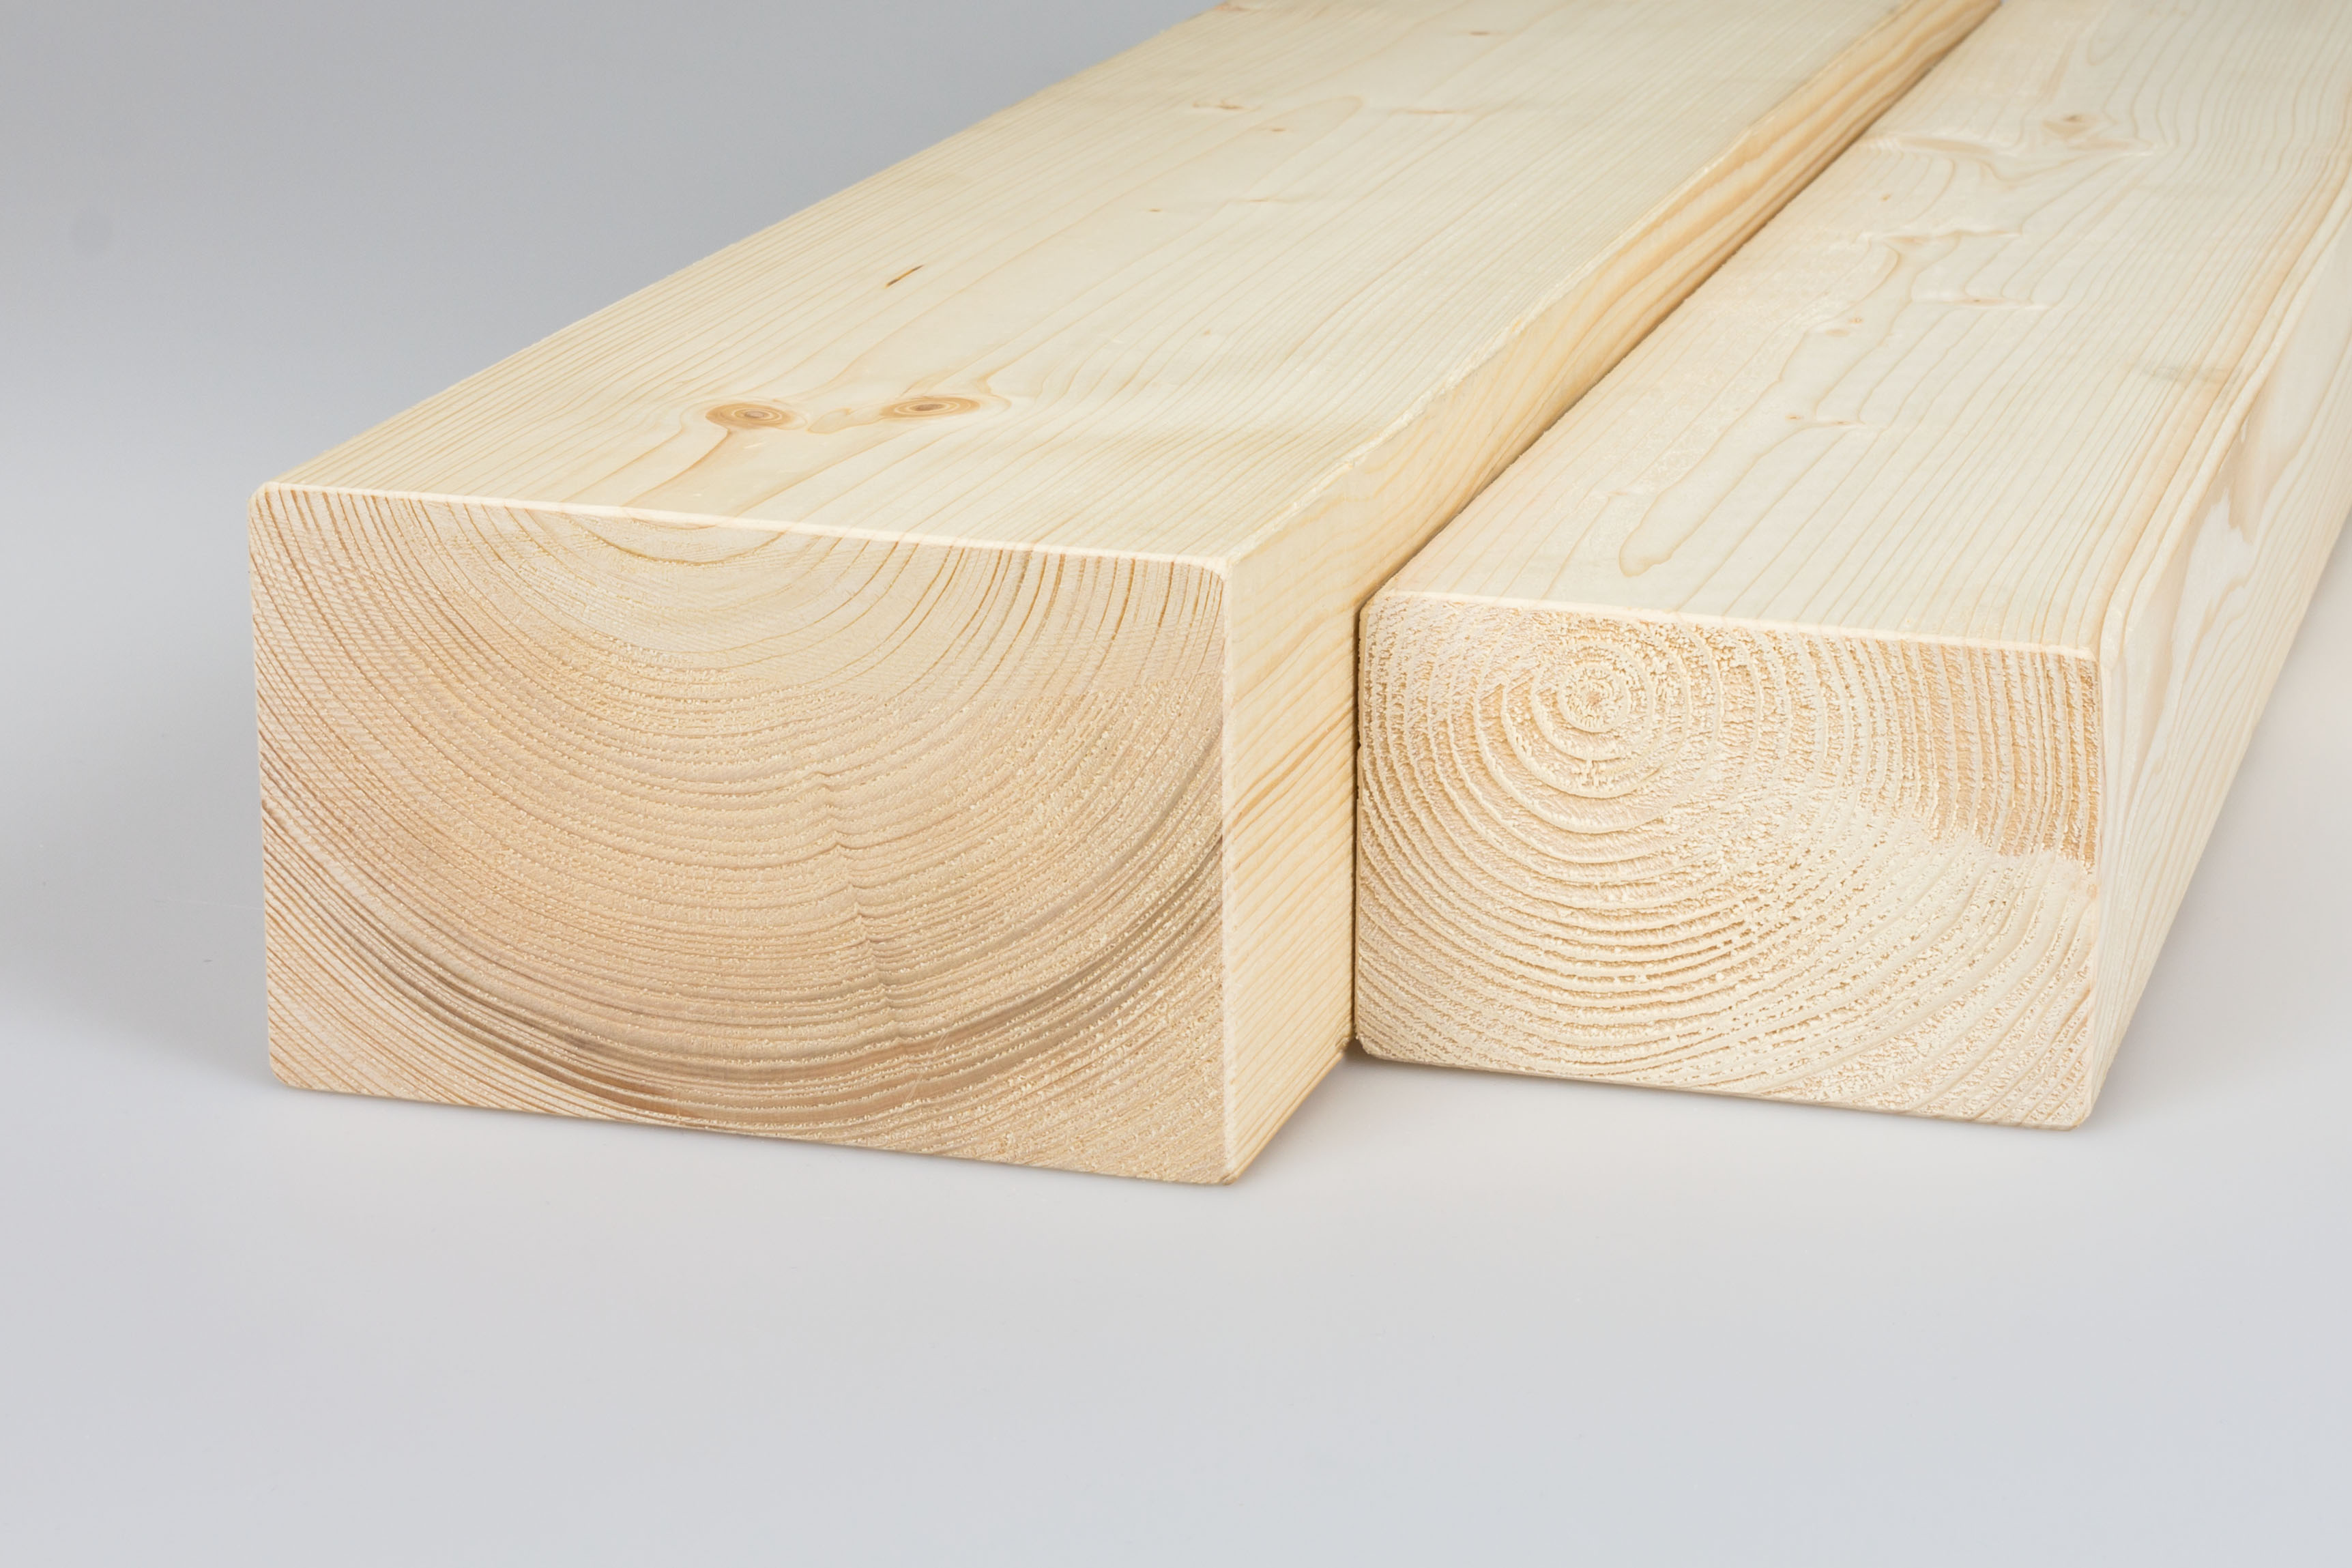 Solid structural timber